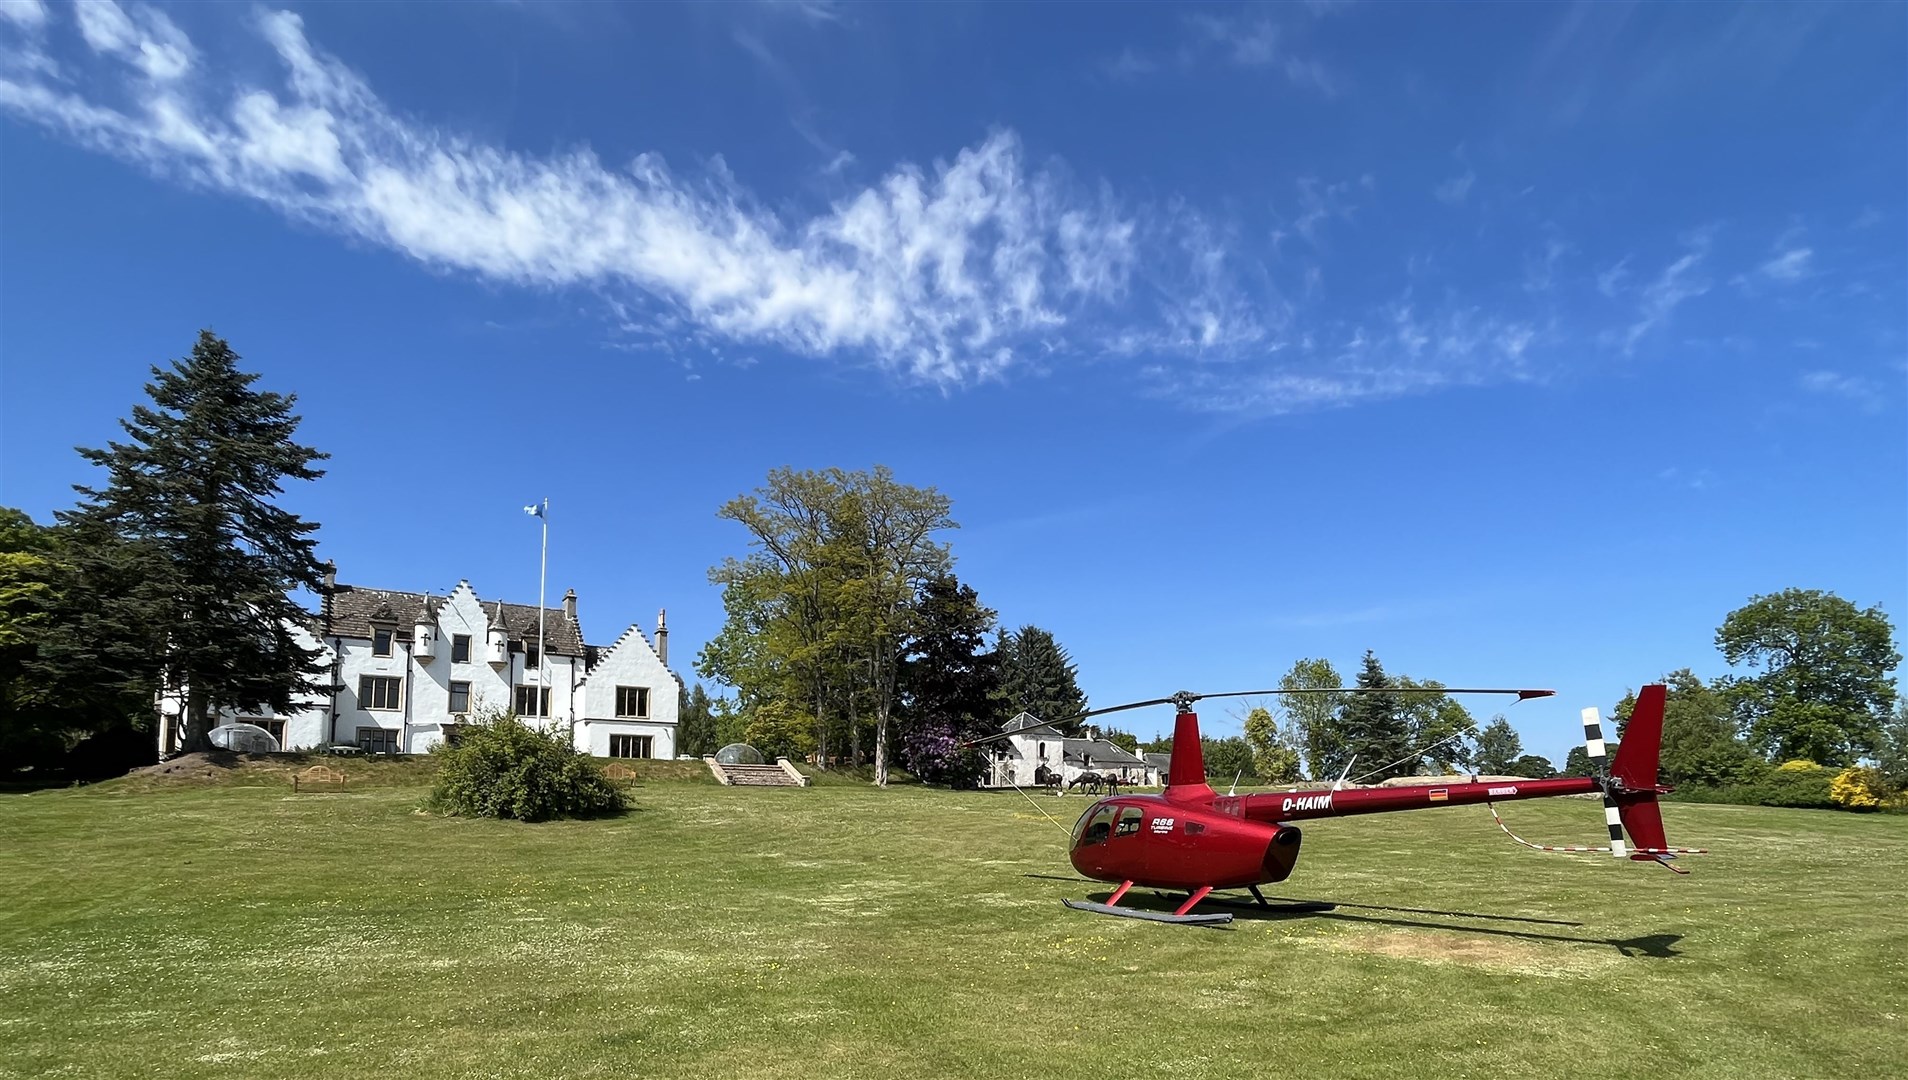 Aviator Ruchir Gupta will keep his helicopter on the grounds of the Kincraig during his stays there.